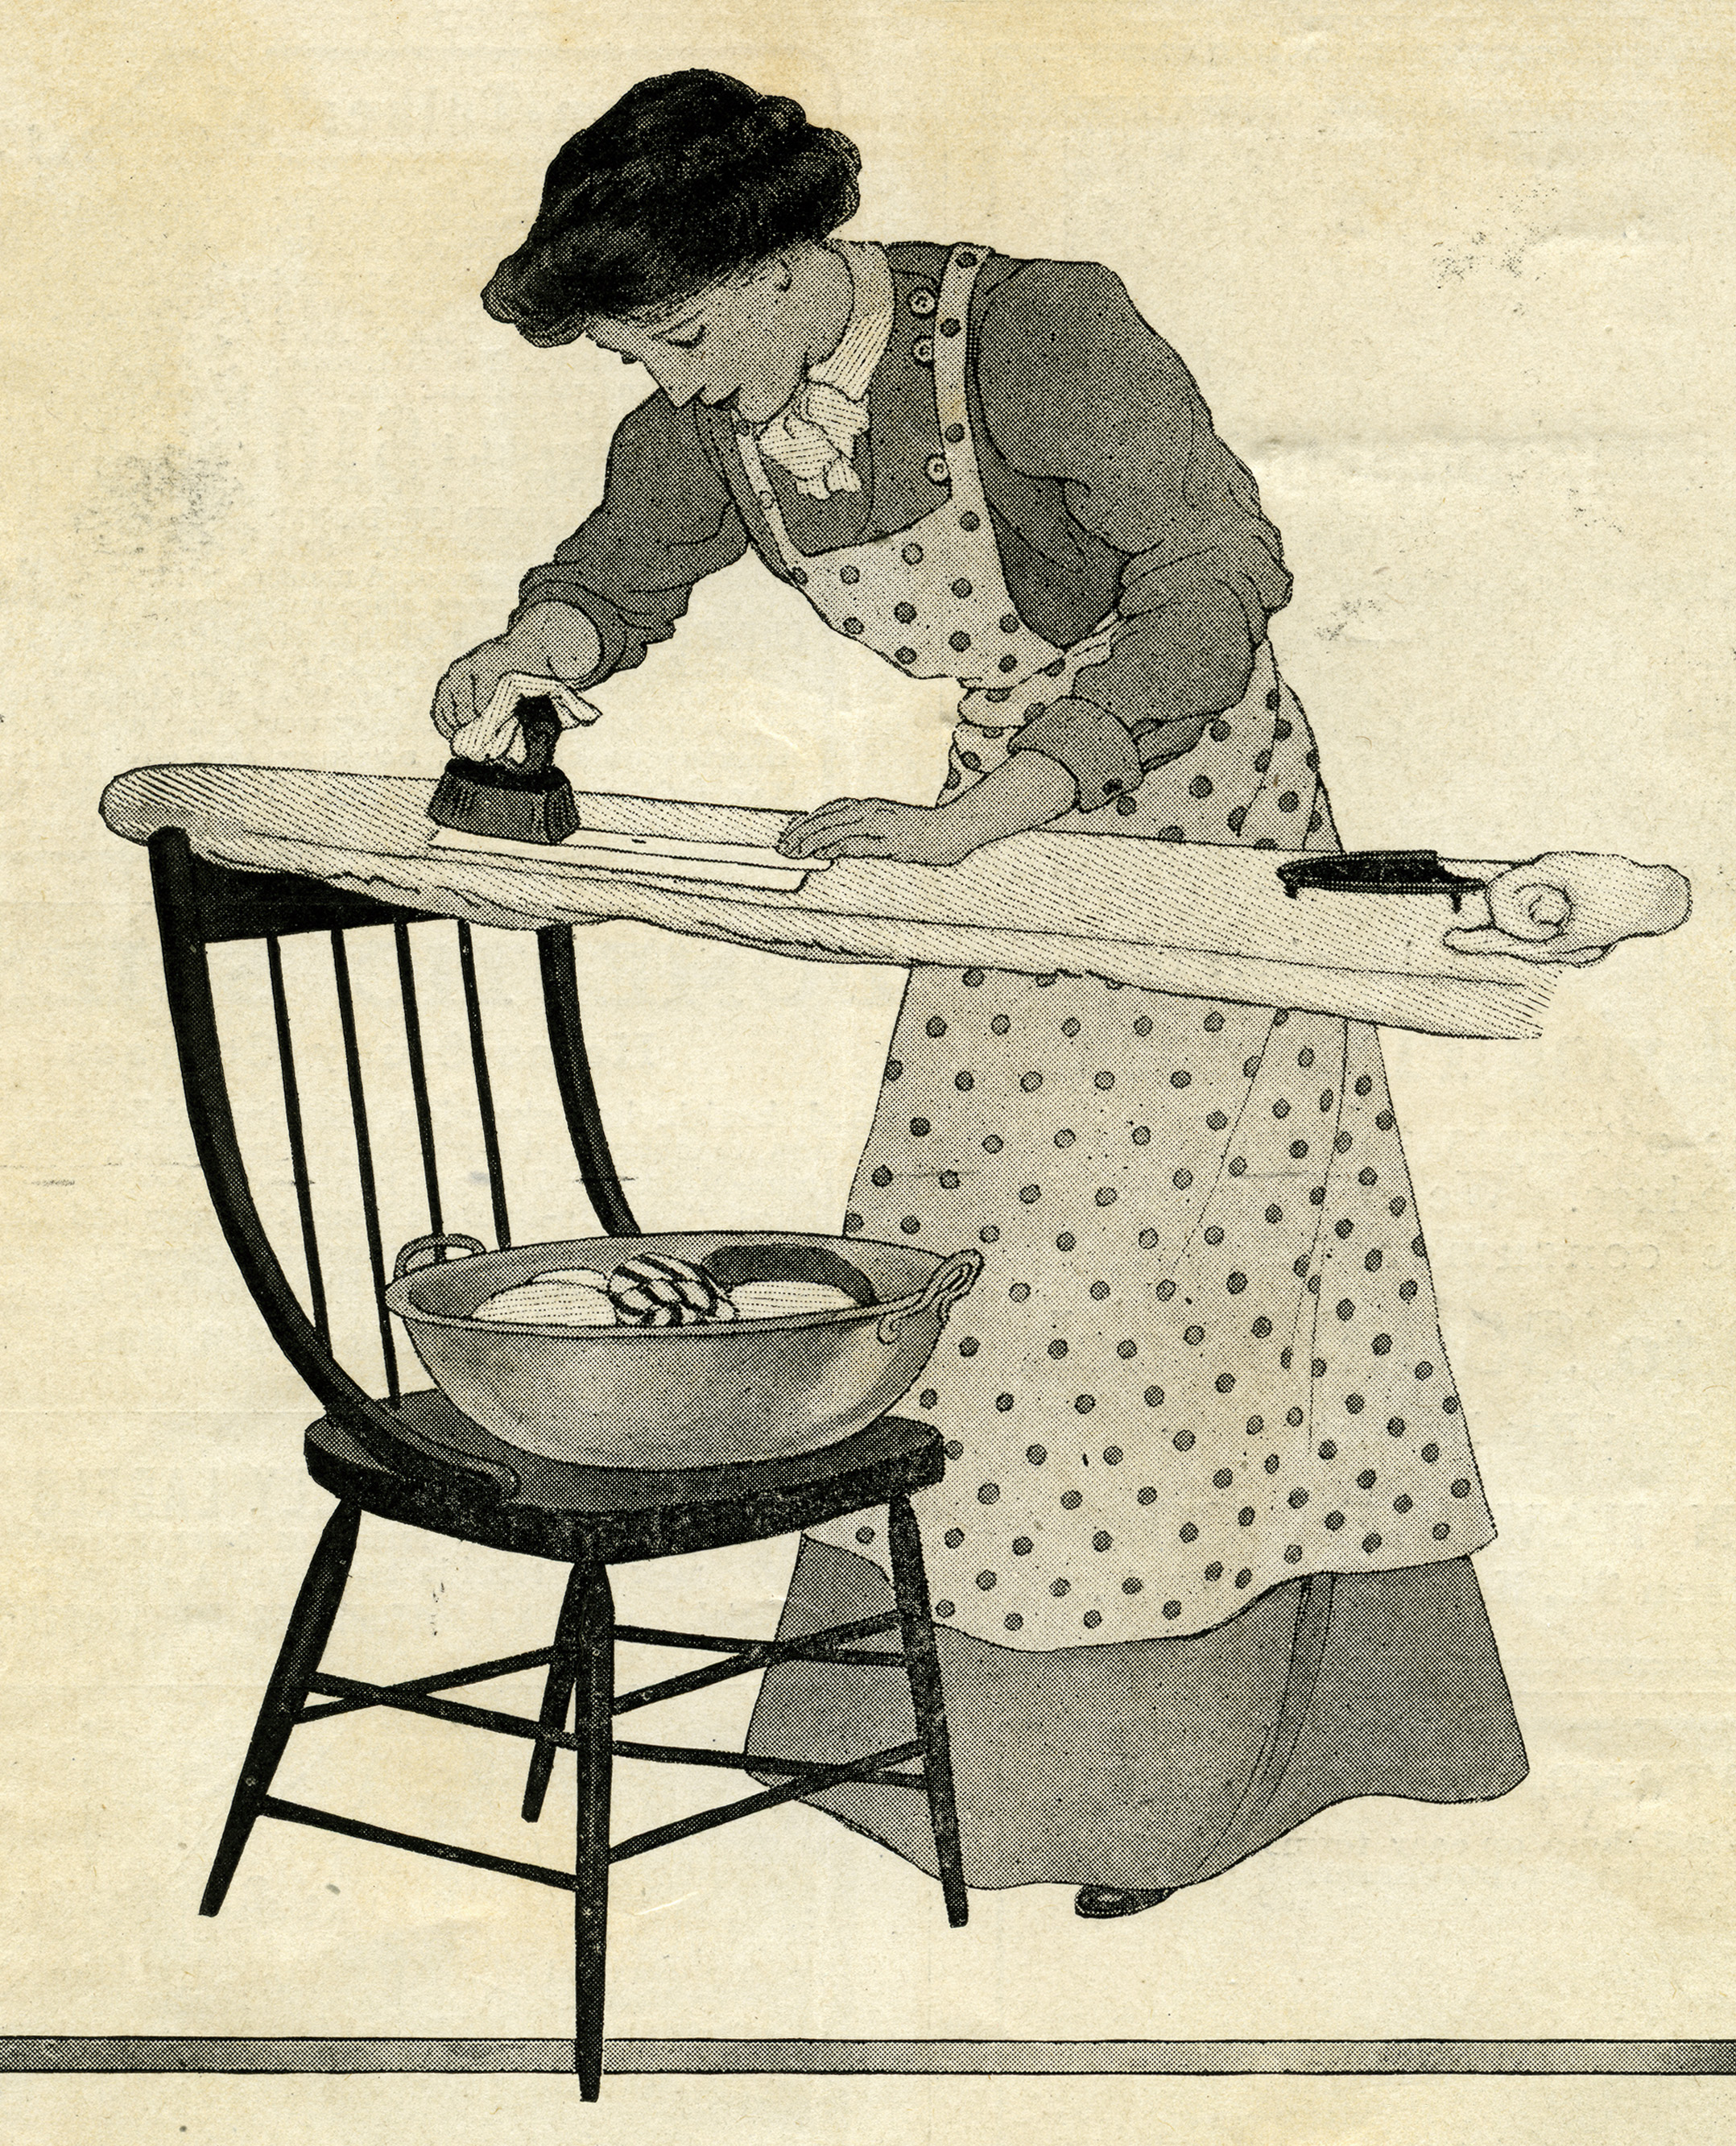 Woman Ironing Clothes   Free Vintage Graphics   Old Design Shop Blog